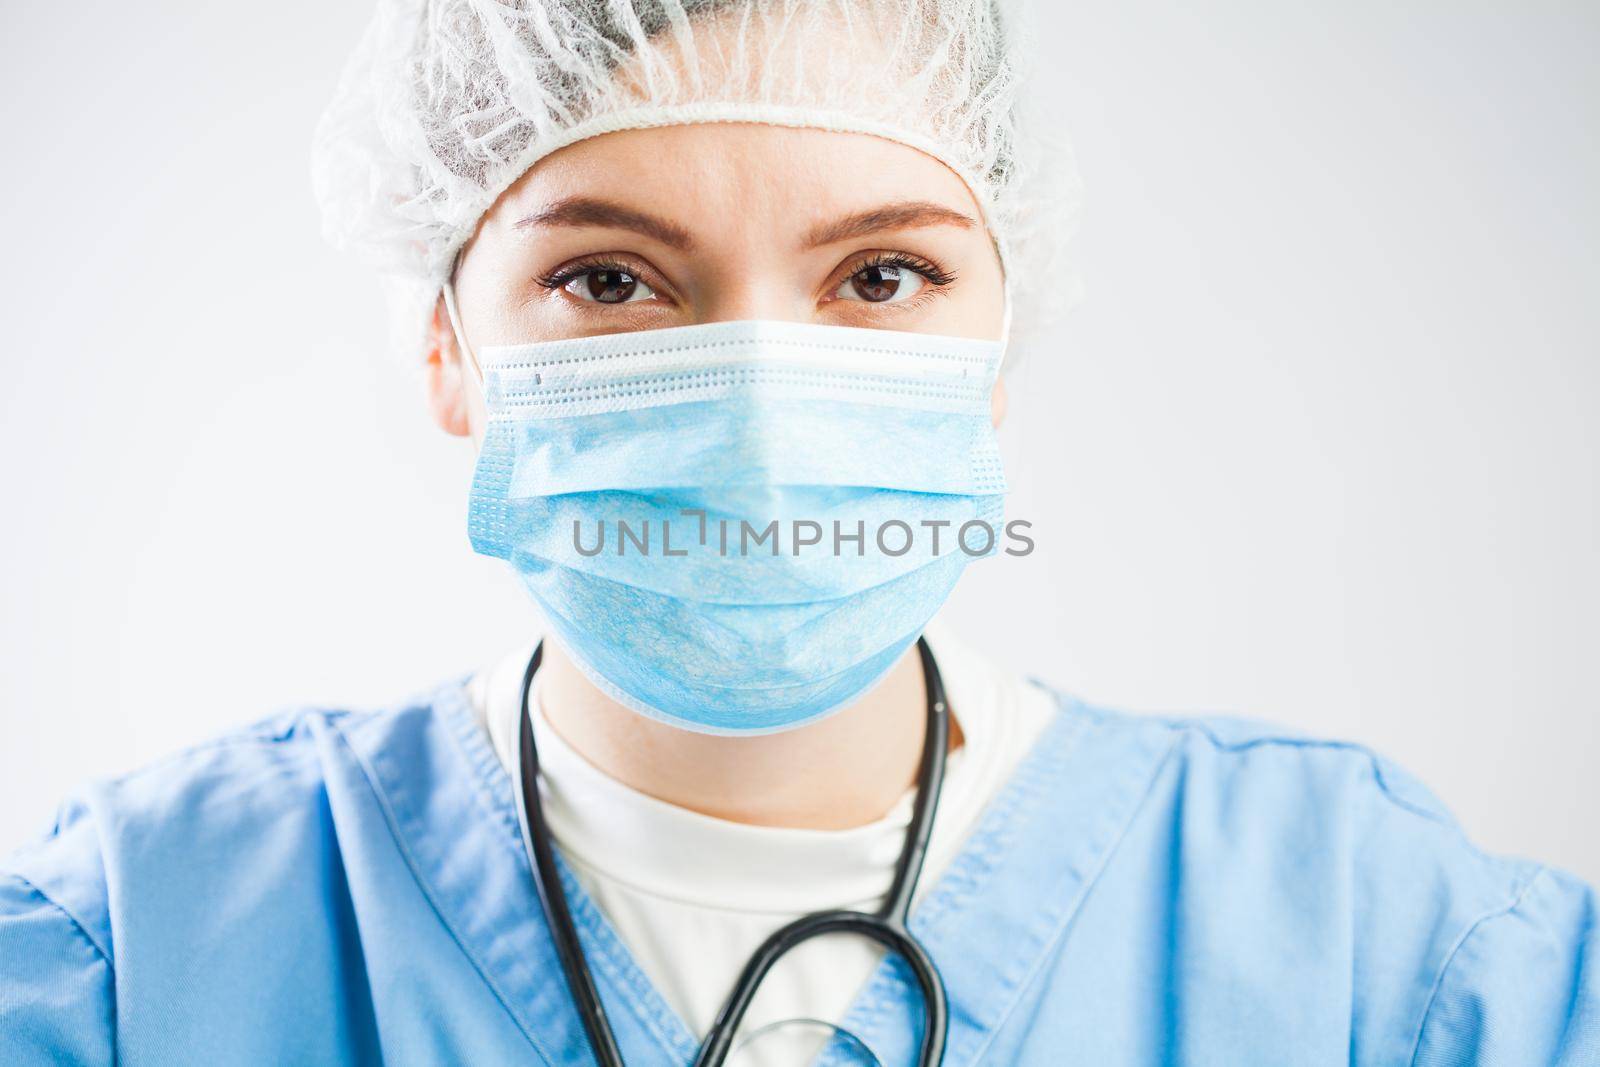 Concerned caucasian UK NHS doctor isolated on white background portrait,wearing medical PPE Personal Protective Equipment,face mask & hair cover,serious troubled look in eyes,worried stressed & tired